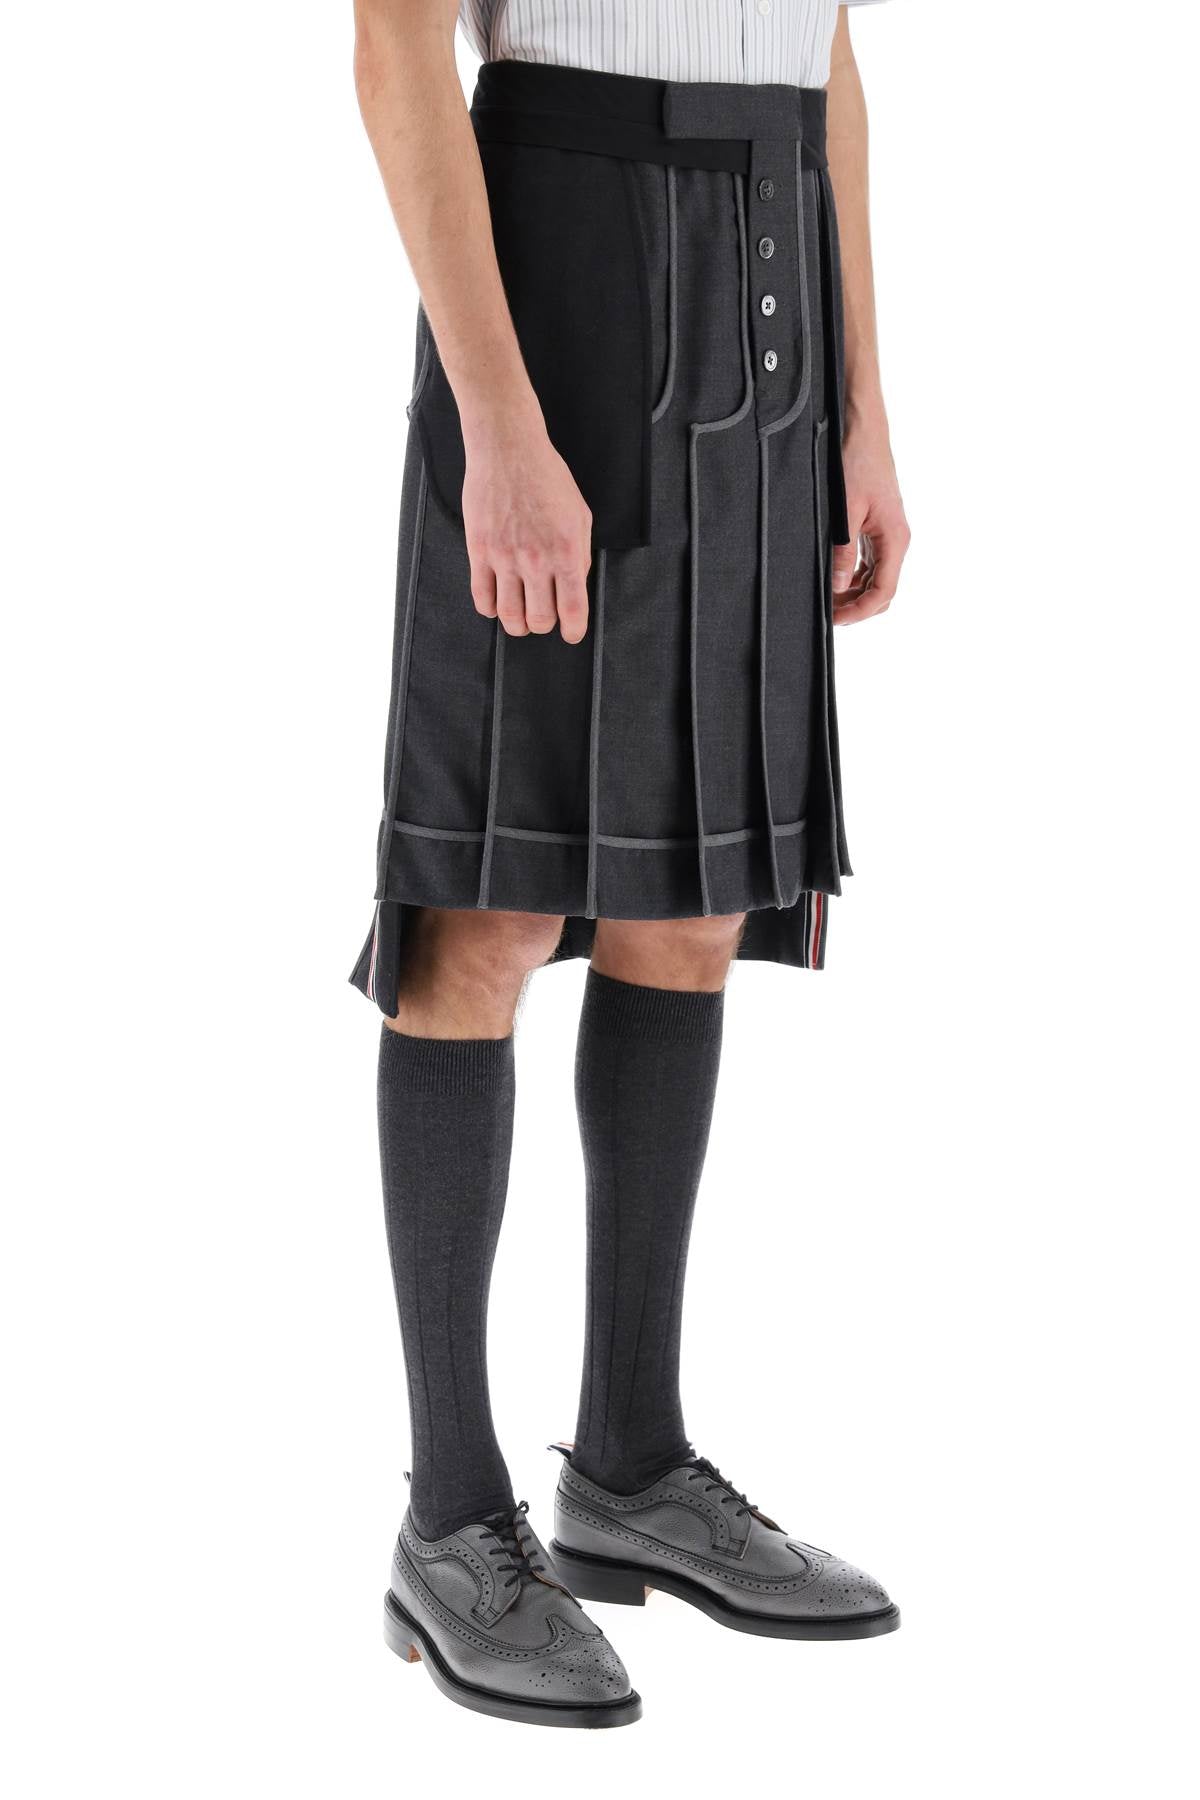 Thom Browne Thom browne inside-out pleated skirt